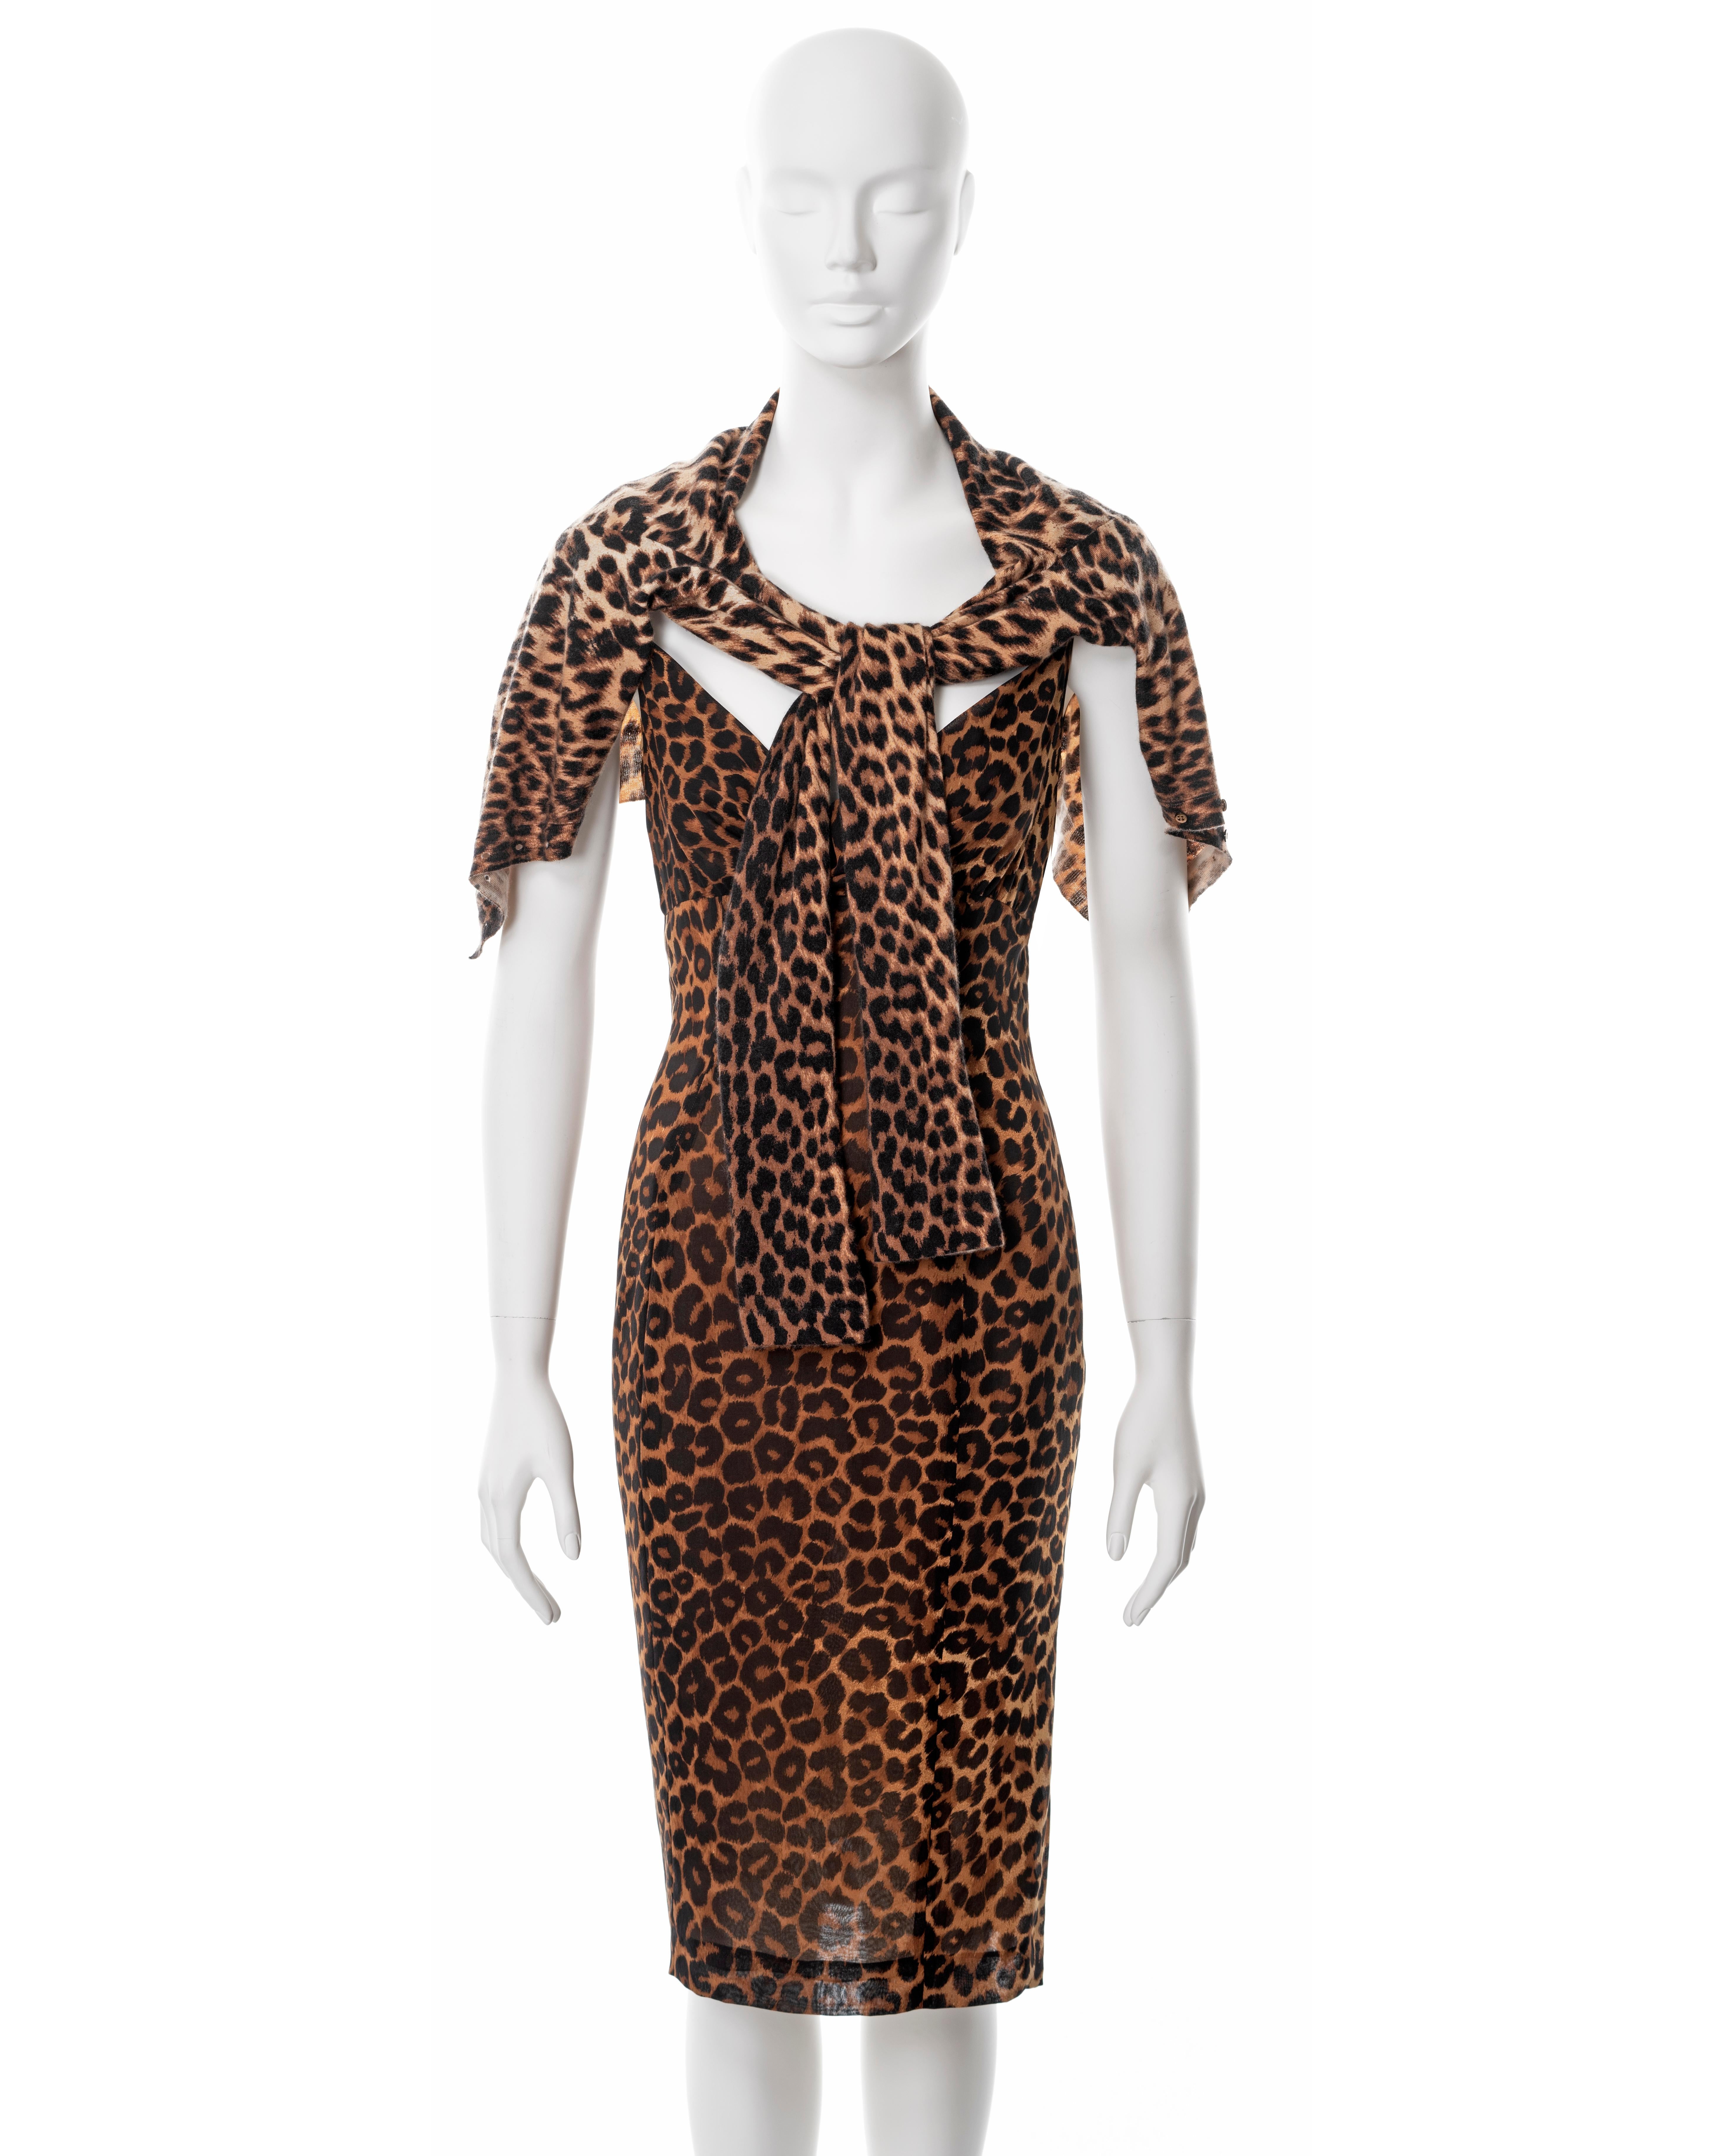 ▪ John Galliano slip dress and cardigan set
▪ Sold by One of a Kind Archive
▪ Spring-Summer 1999
▪ Slip dress constructed from leopard printed 100% Silk 
▪ Cardigan constructed from leopard print 100% Cashmere  
▪ Cowl neck 
▪ Spaghetti straps 
▪